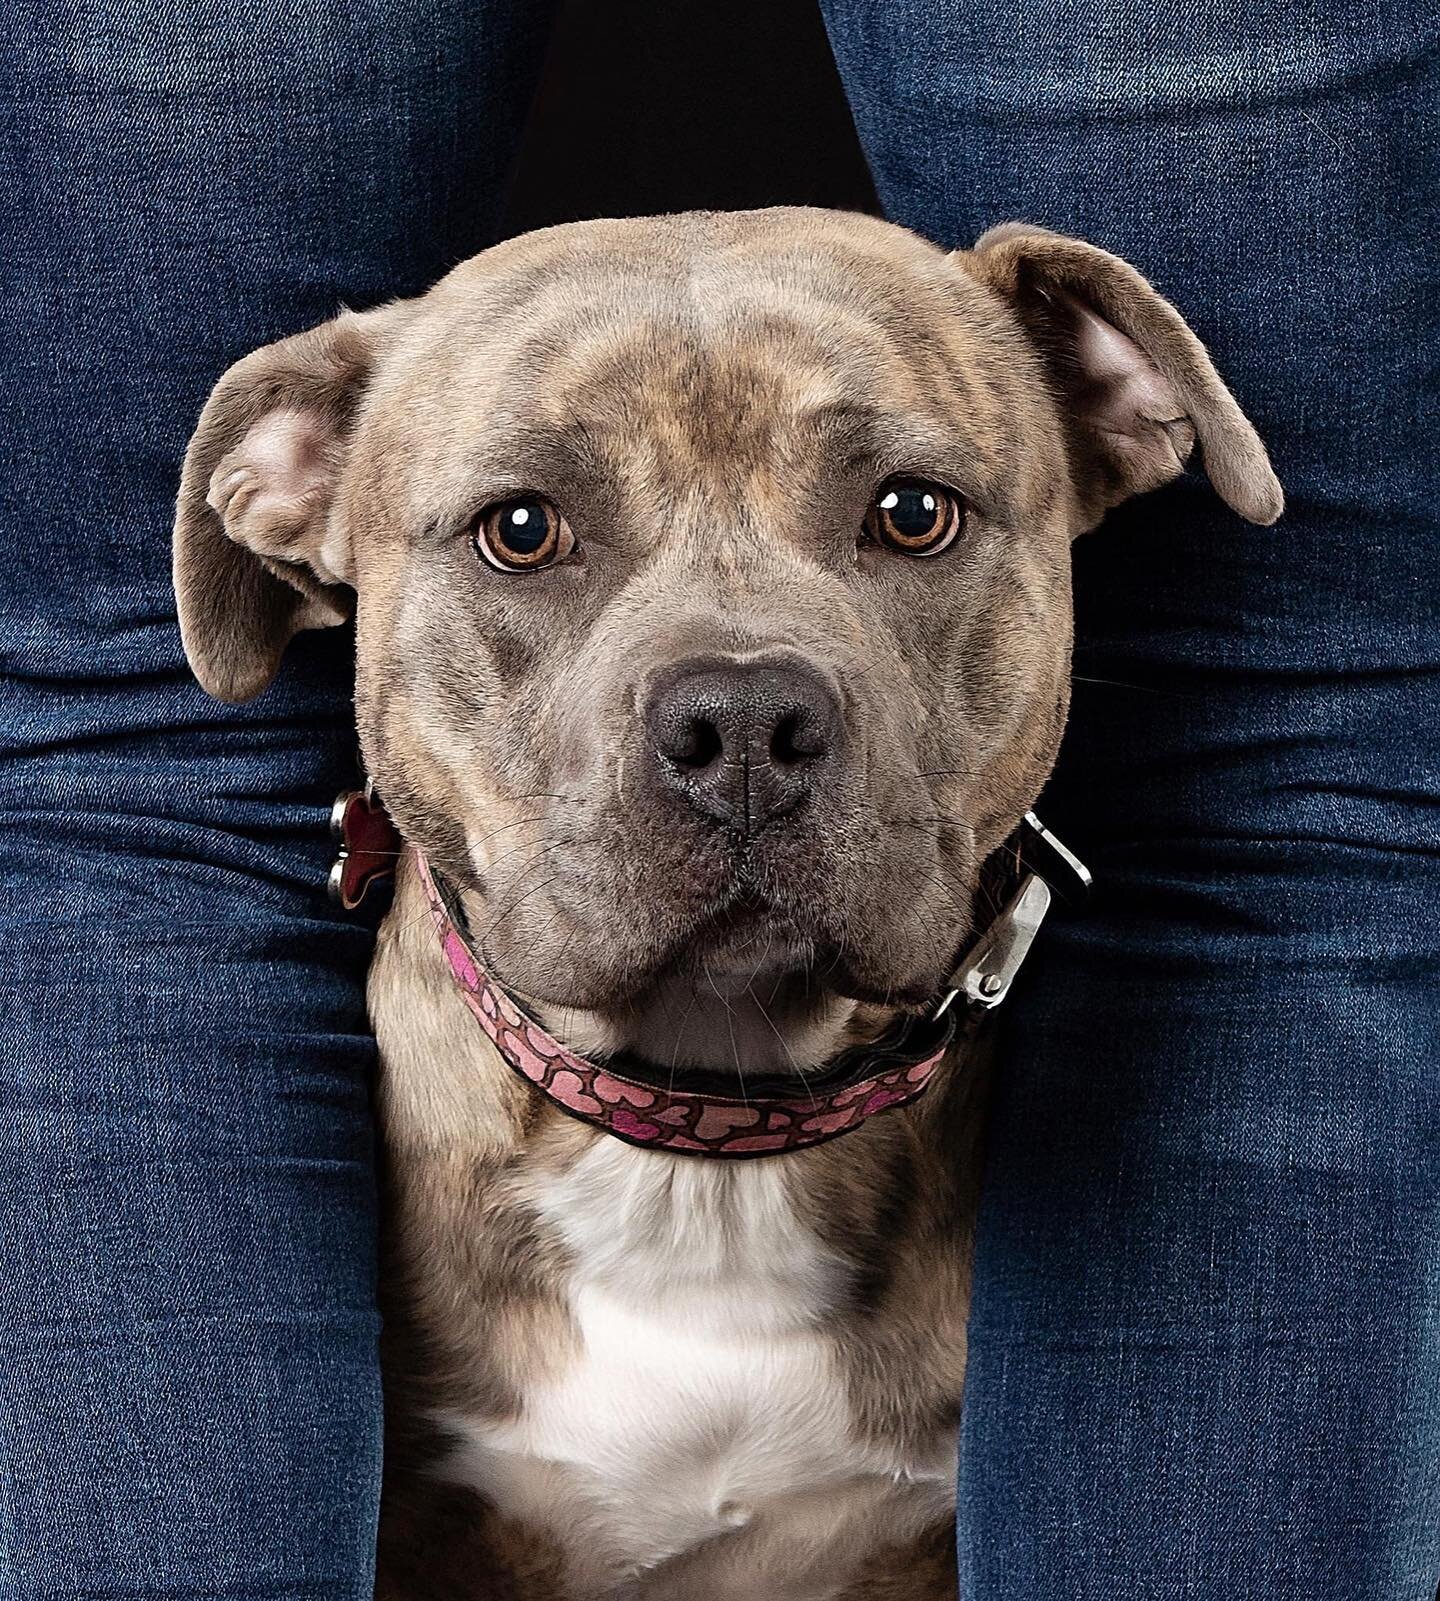 Pitbulls are so misunderstood, as they&rsquo;re beautiful, caring, loving puppies #puppy #pitbull #rescuedog  #dogmom